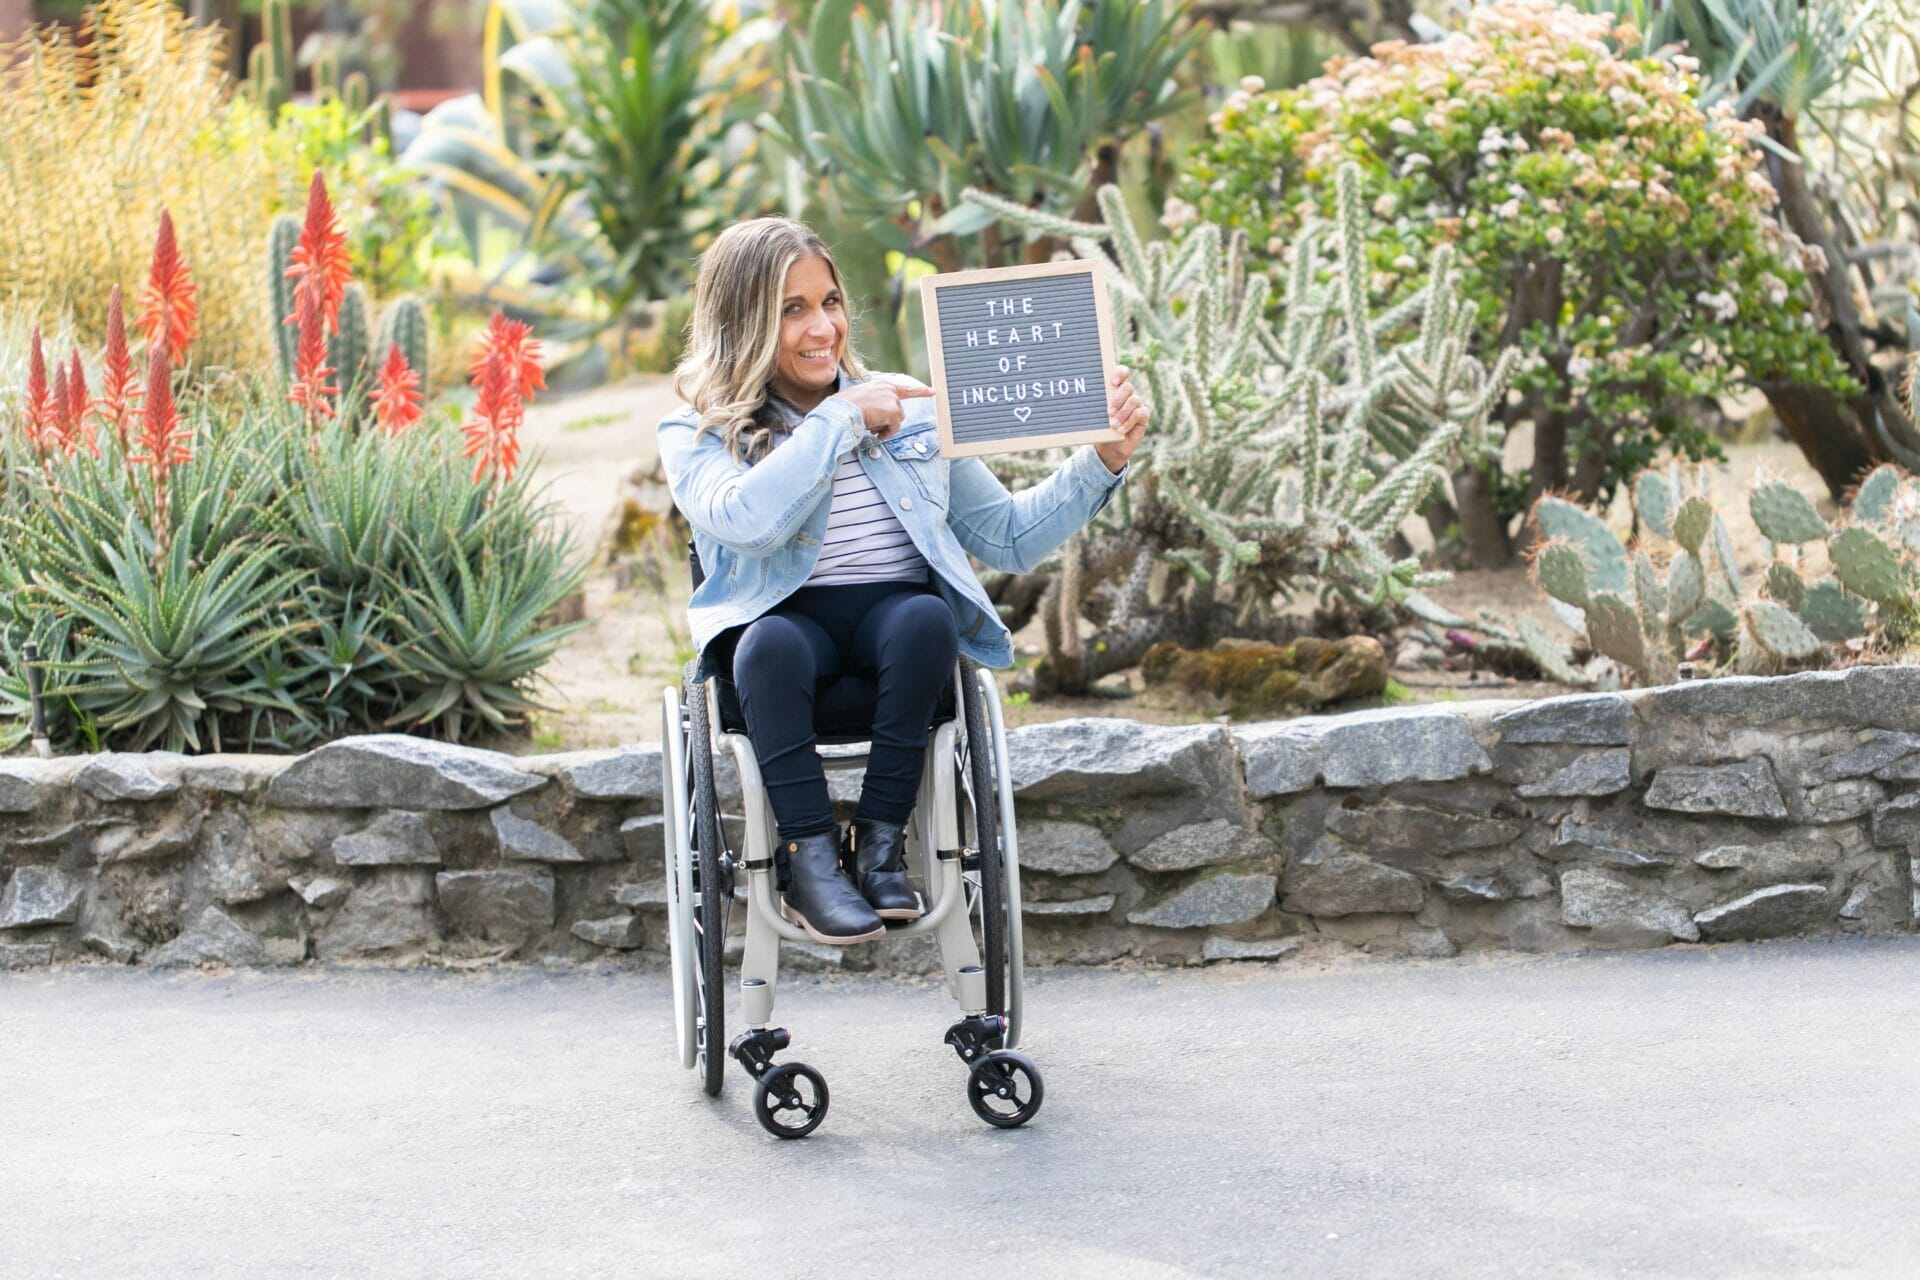 Alycia sitting in her wheelchair in front of green cactus, wearing a jean jacket and black pants and boots holding a sign that says The Heart of Inclusion.